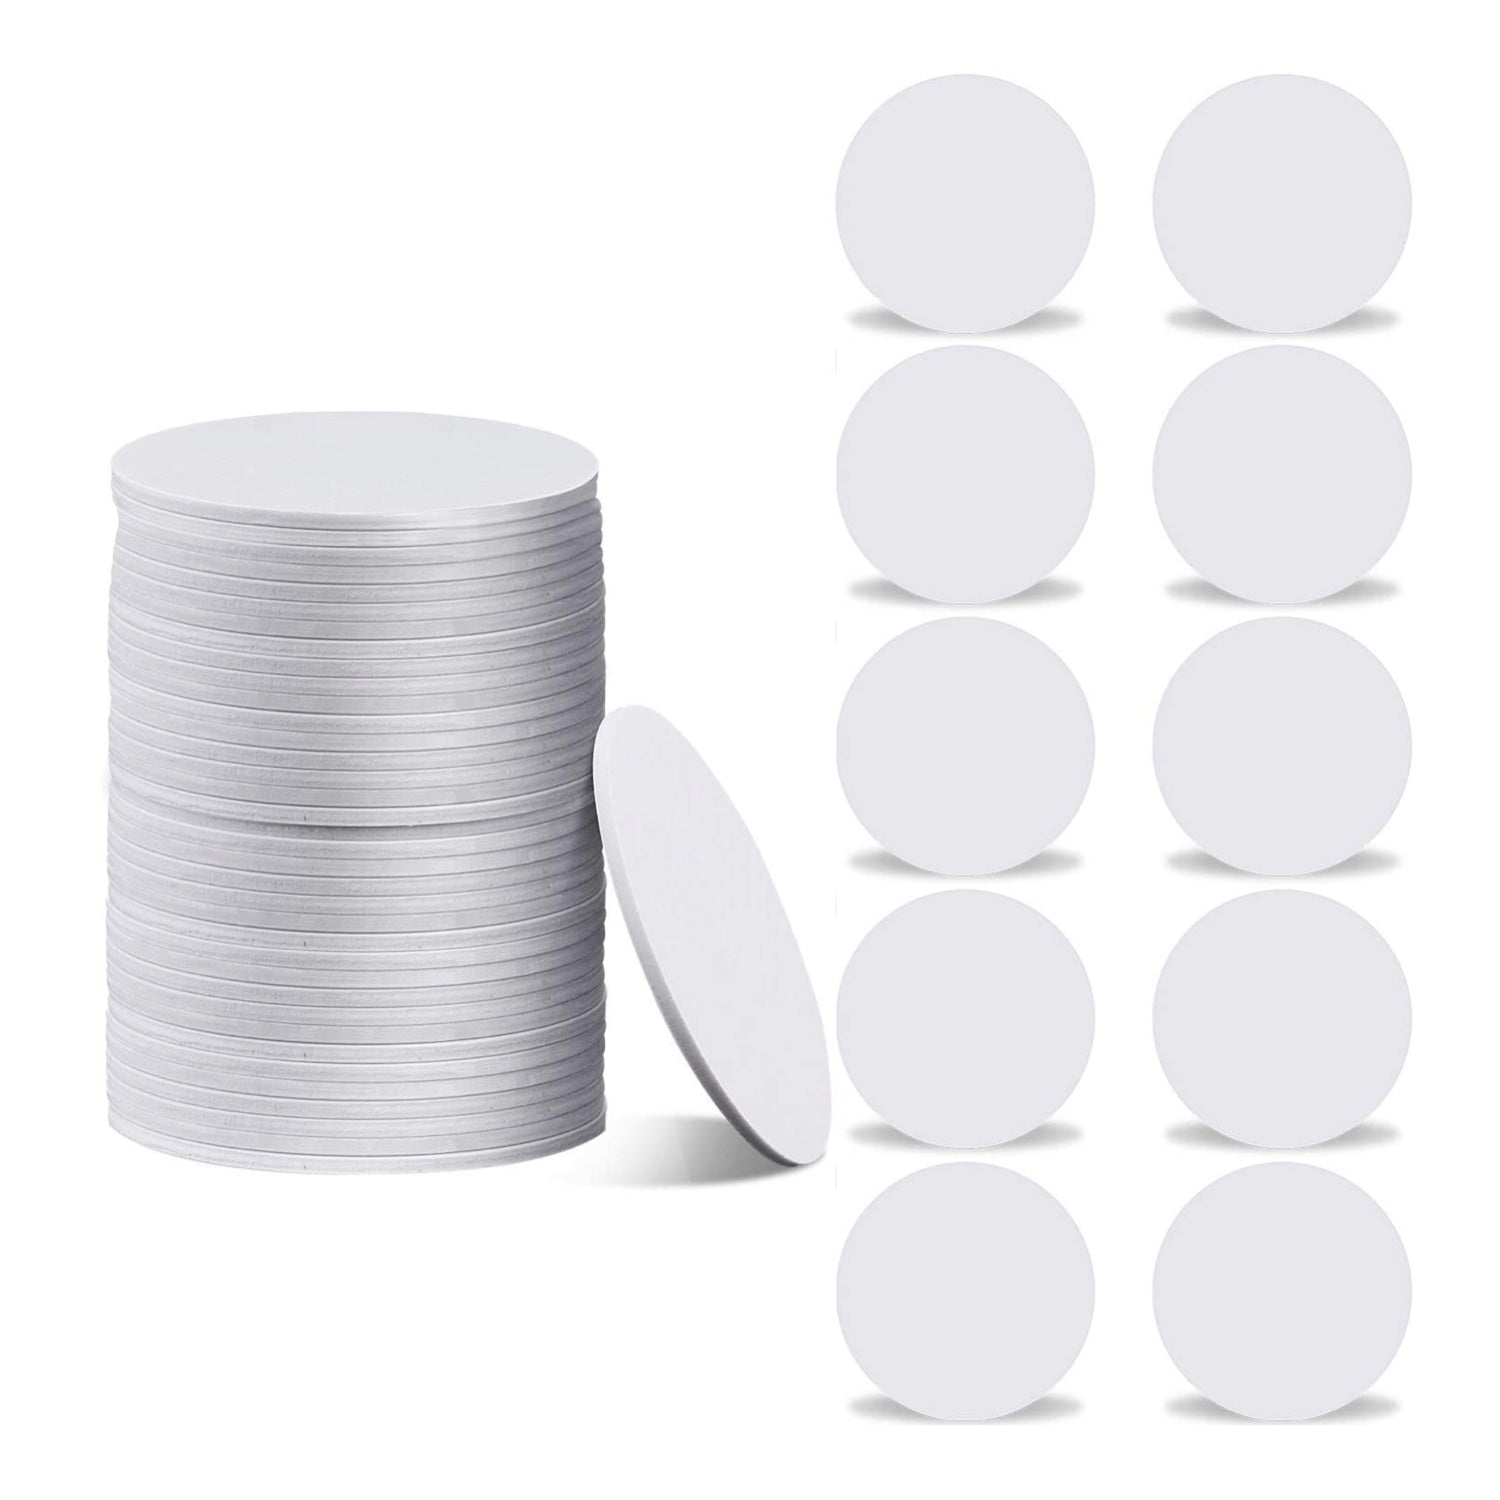 Gialer NTAG215 NFC Tags Round 25mm(1 inch) Blank White NTAG215 NFC Cards Compatible TagMo Amiibo